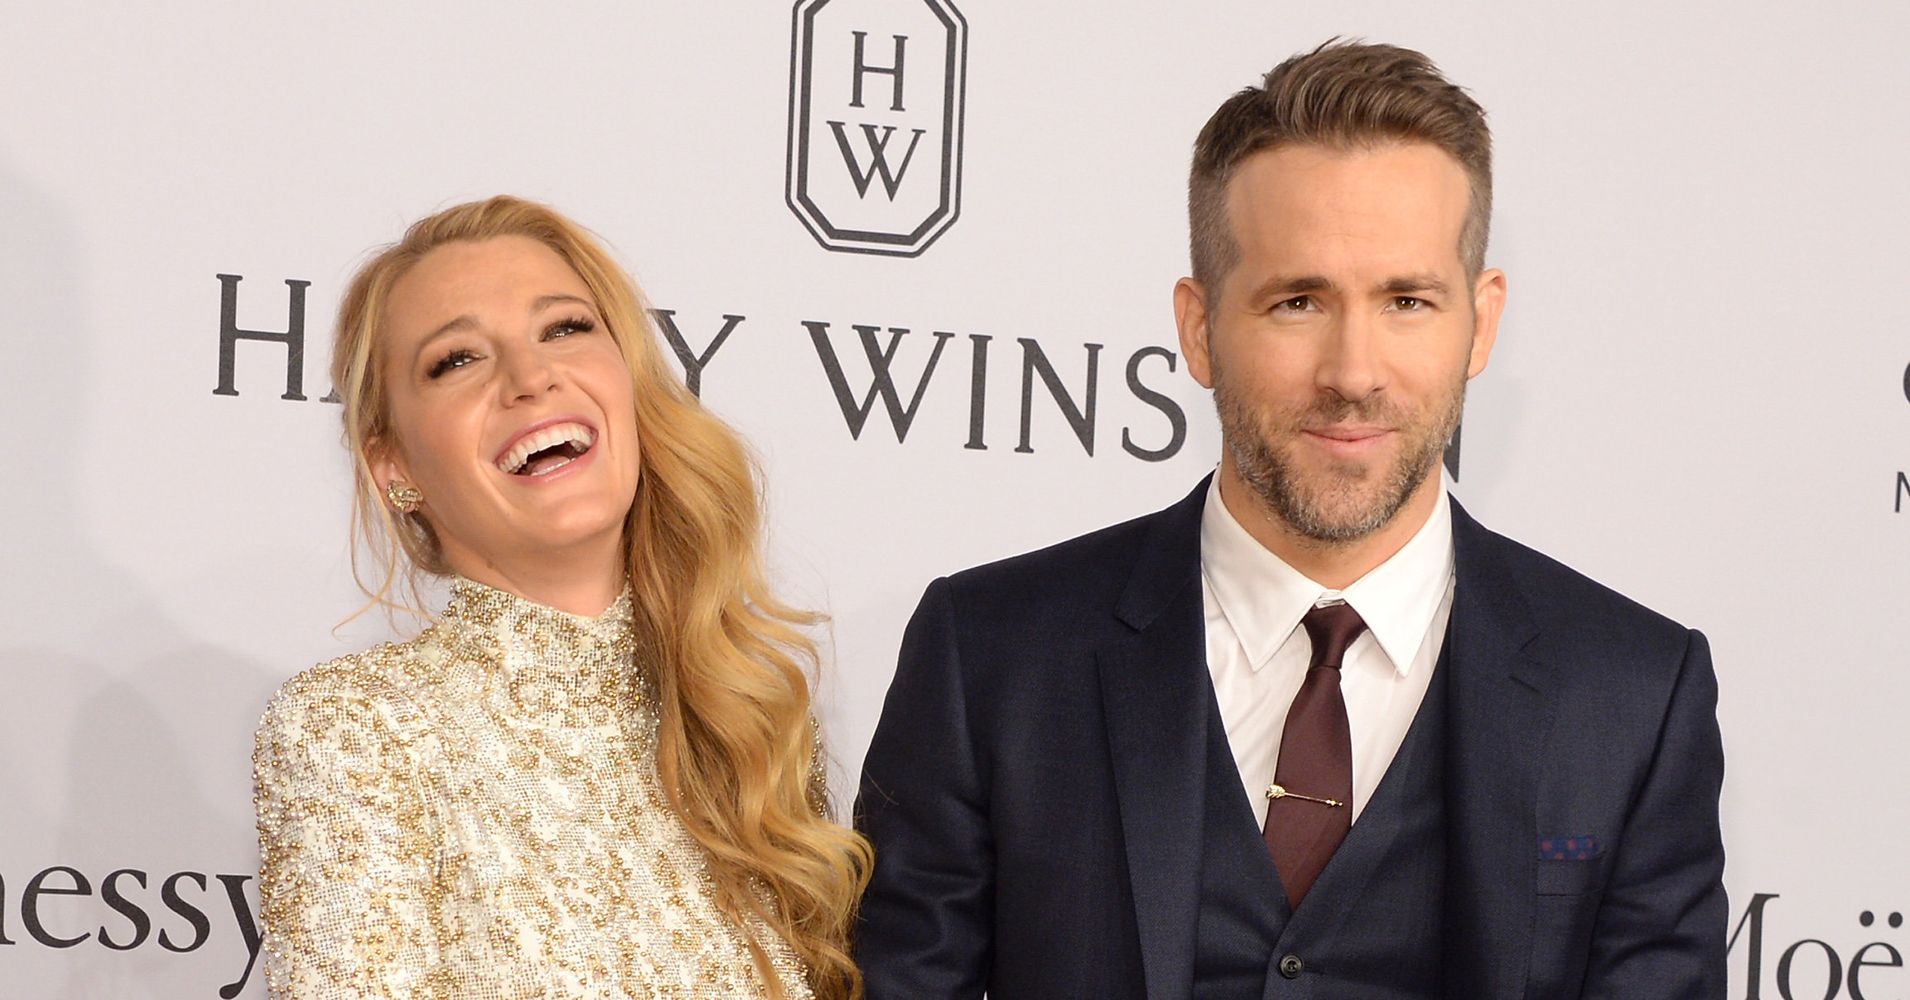 Sex With Ryan Reynolds Is Laughable According To Ryan Reynolds Huffpost 